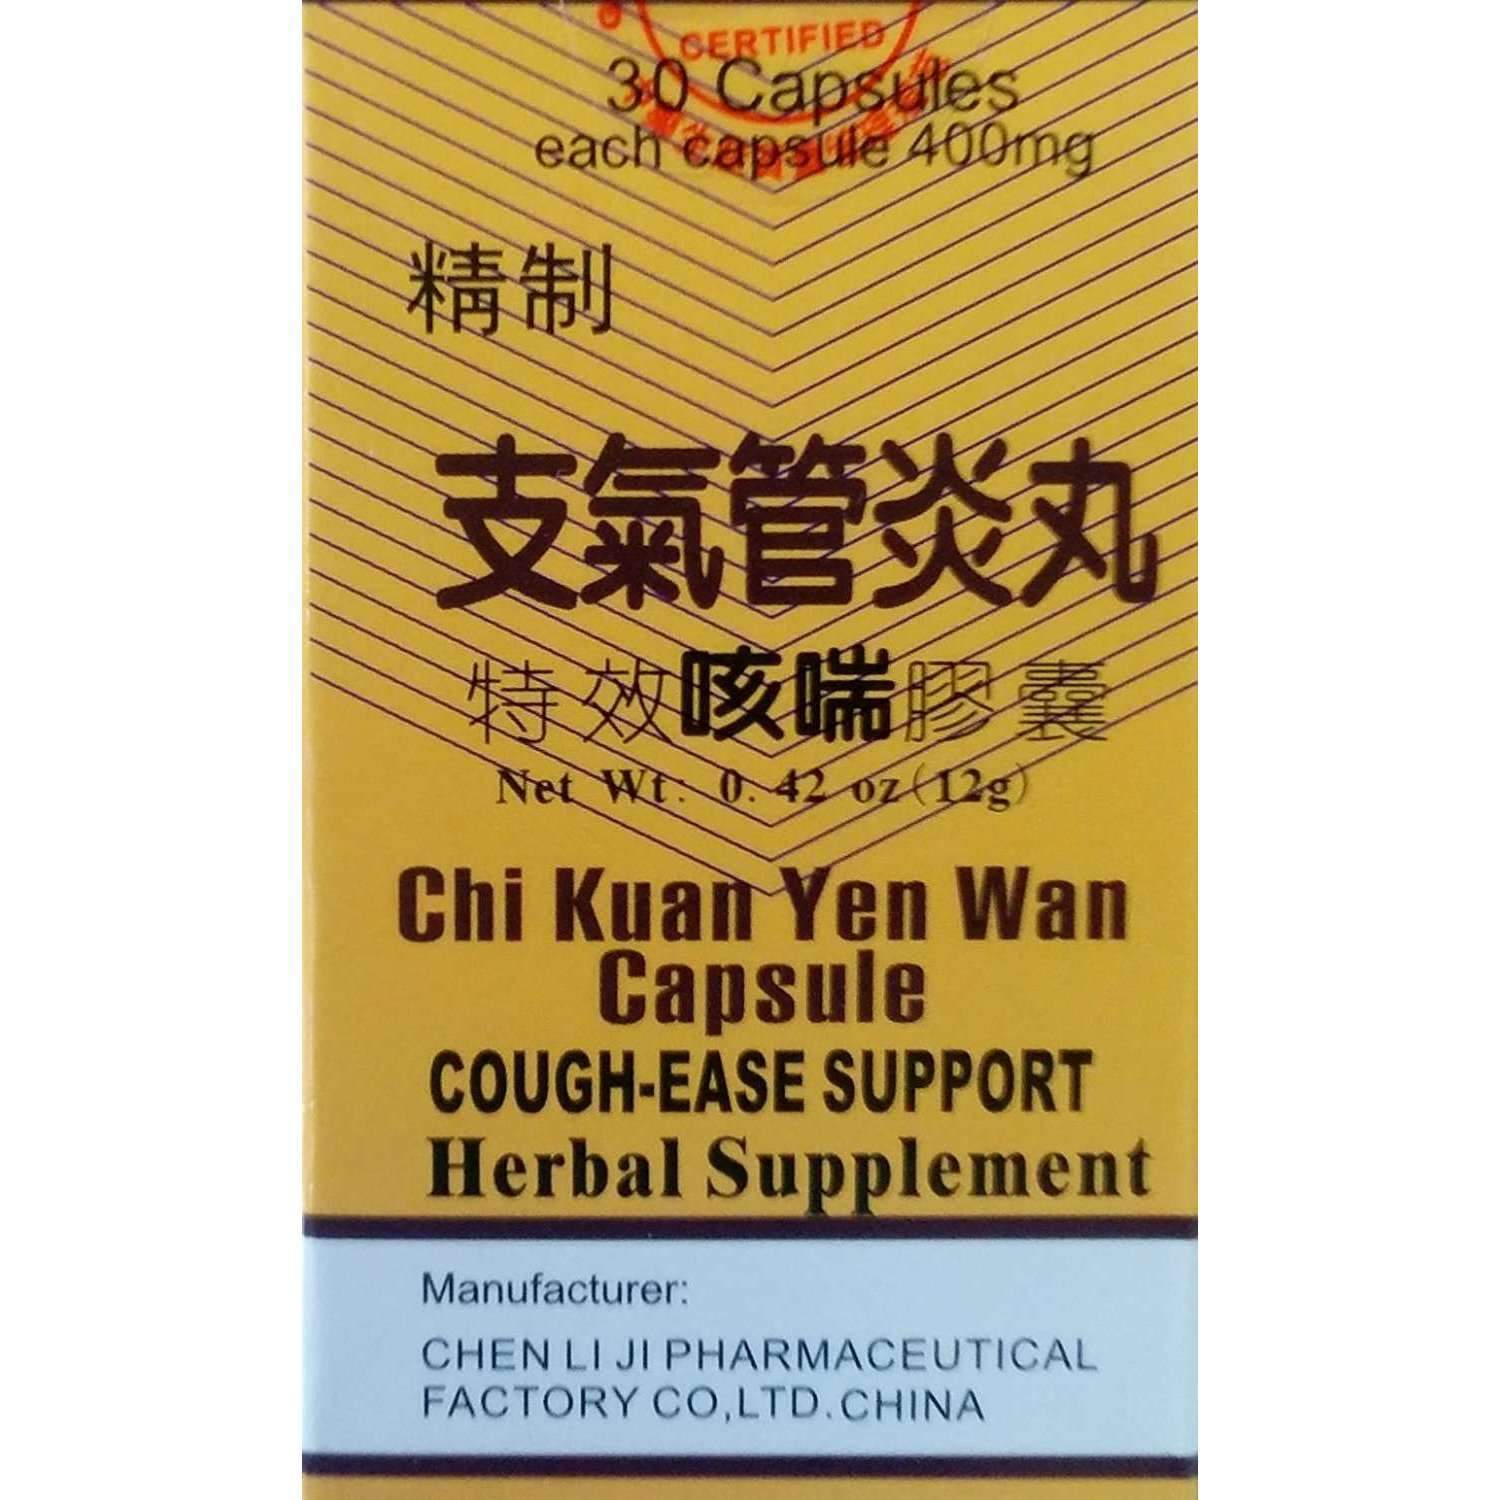 Cough-Ease Support, Chi Kuan Yen Wan (30 Capsules) - Buy at New Green Nutrition